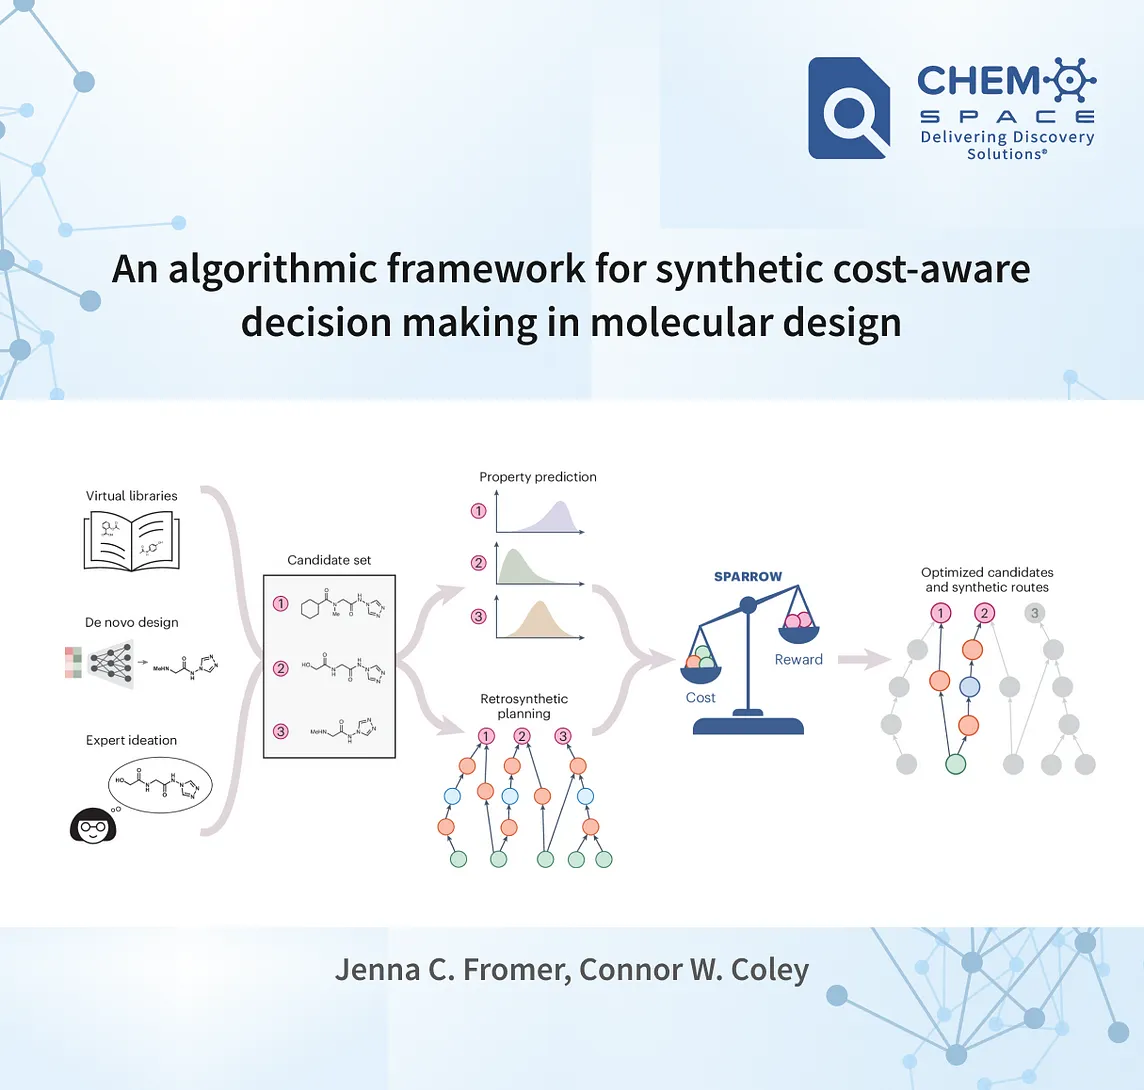 Cost-aware prioritization of molecules for synthesis with SPARROW